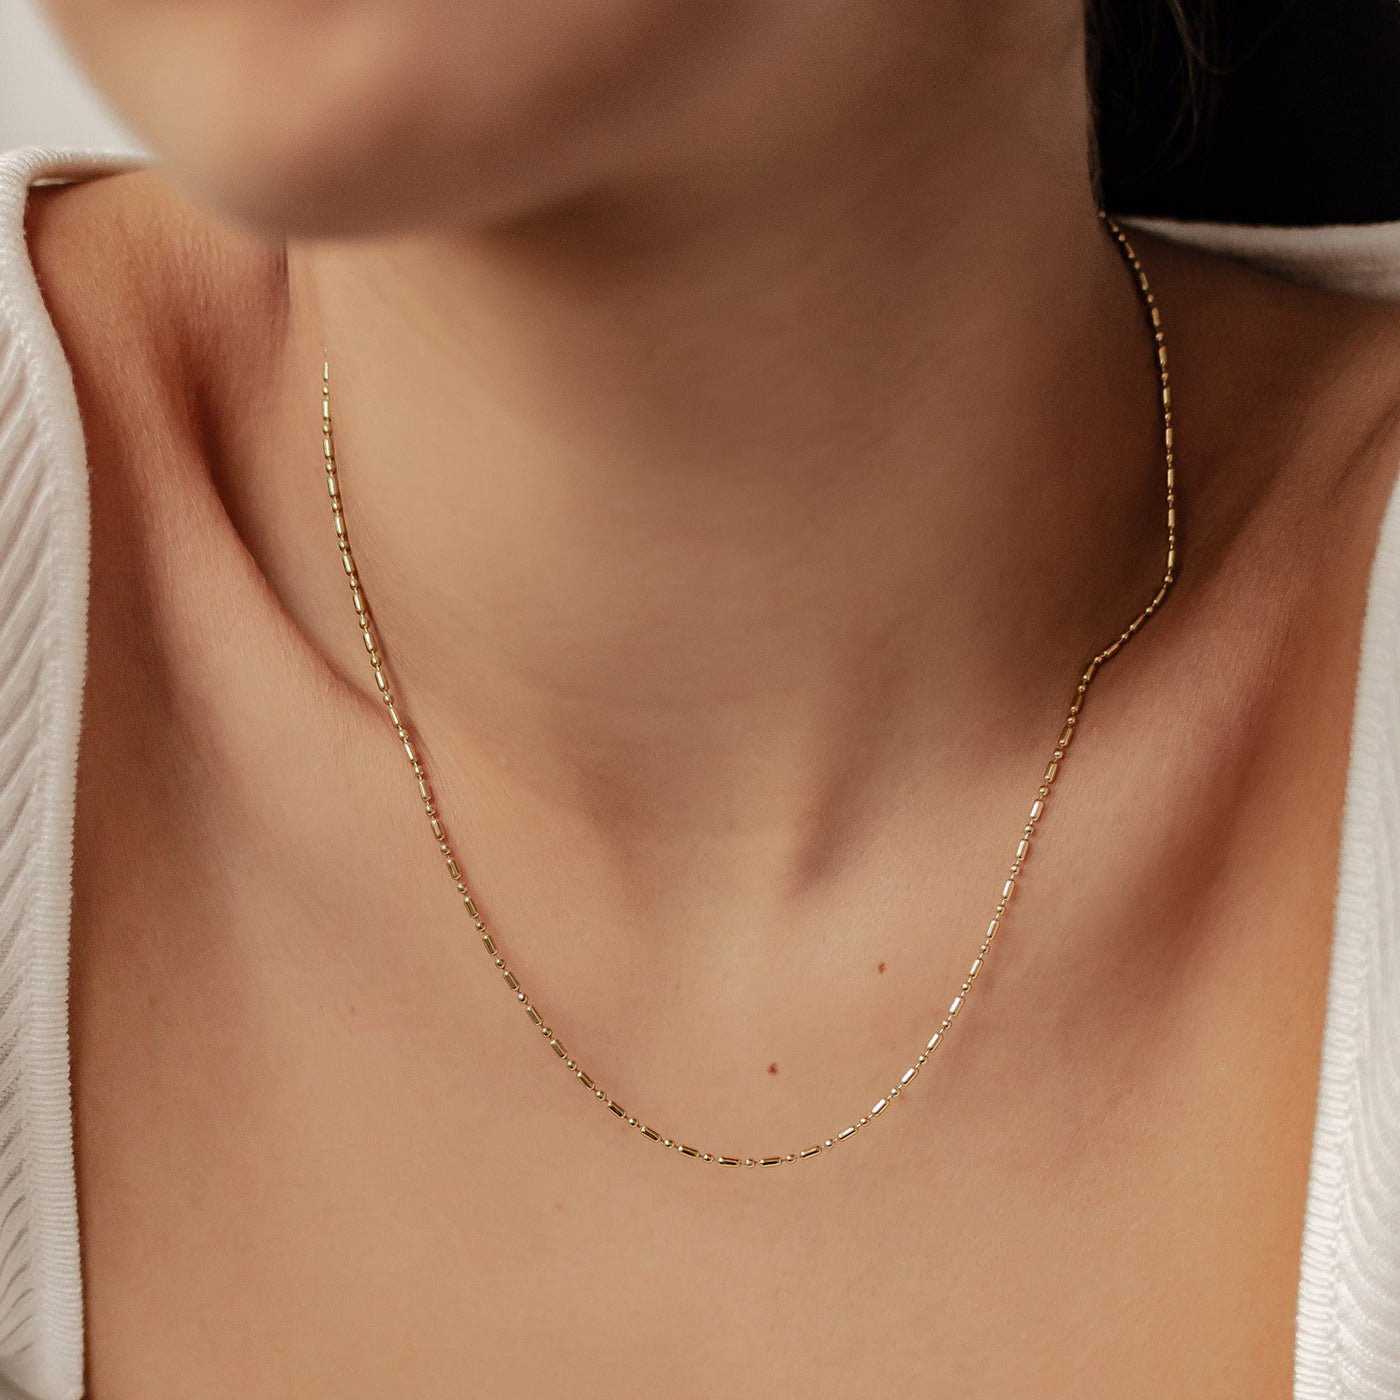 Bead and Bar Chain Necklace Gold